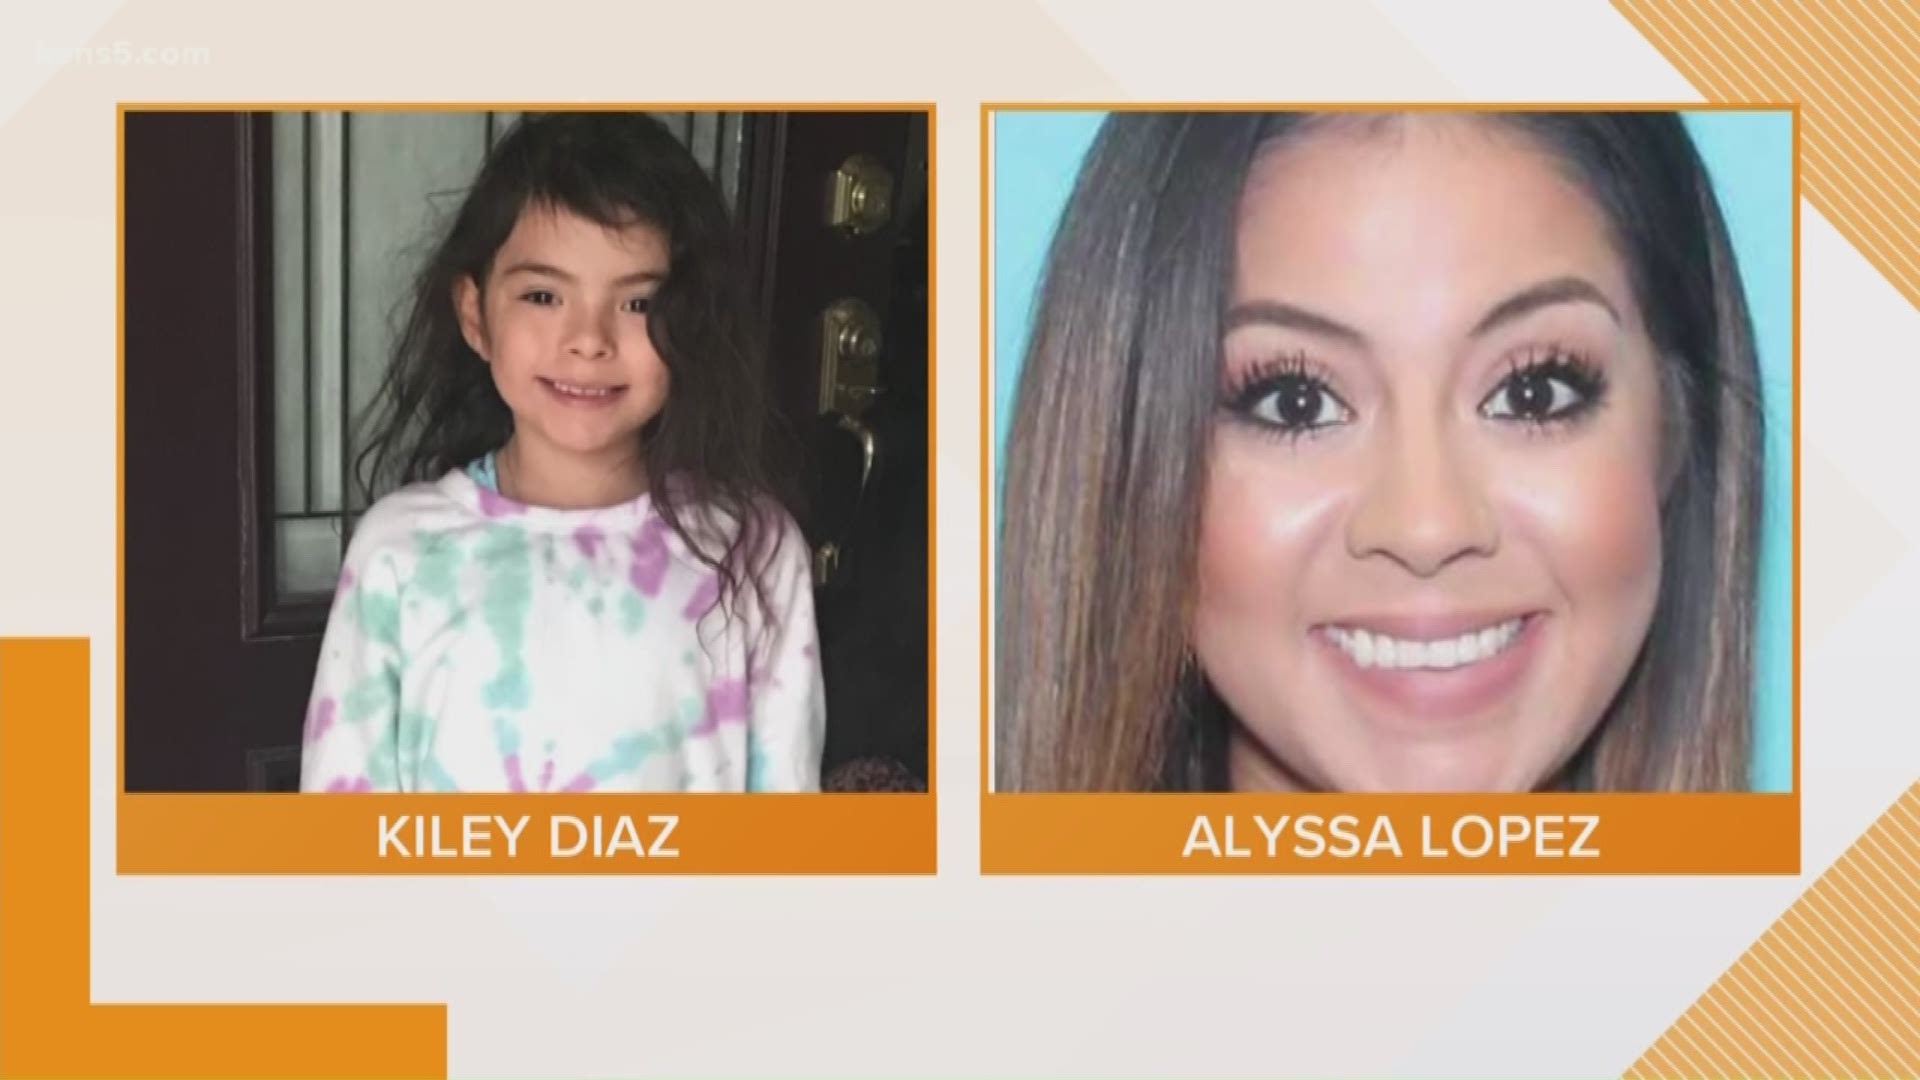 An Amber Alert has been issued for 8-year-old Kiley Diaz.